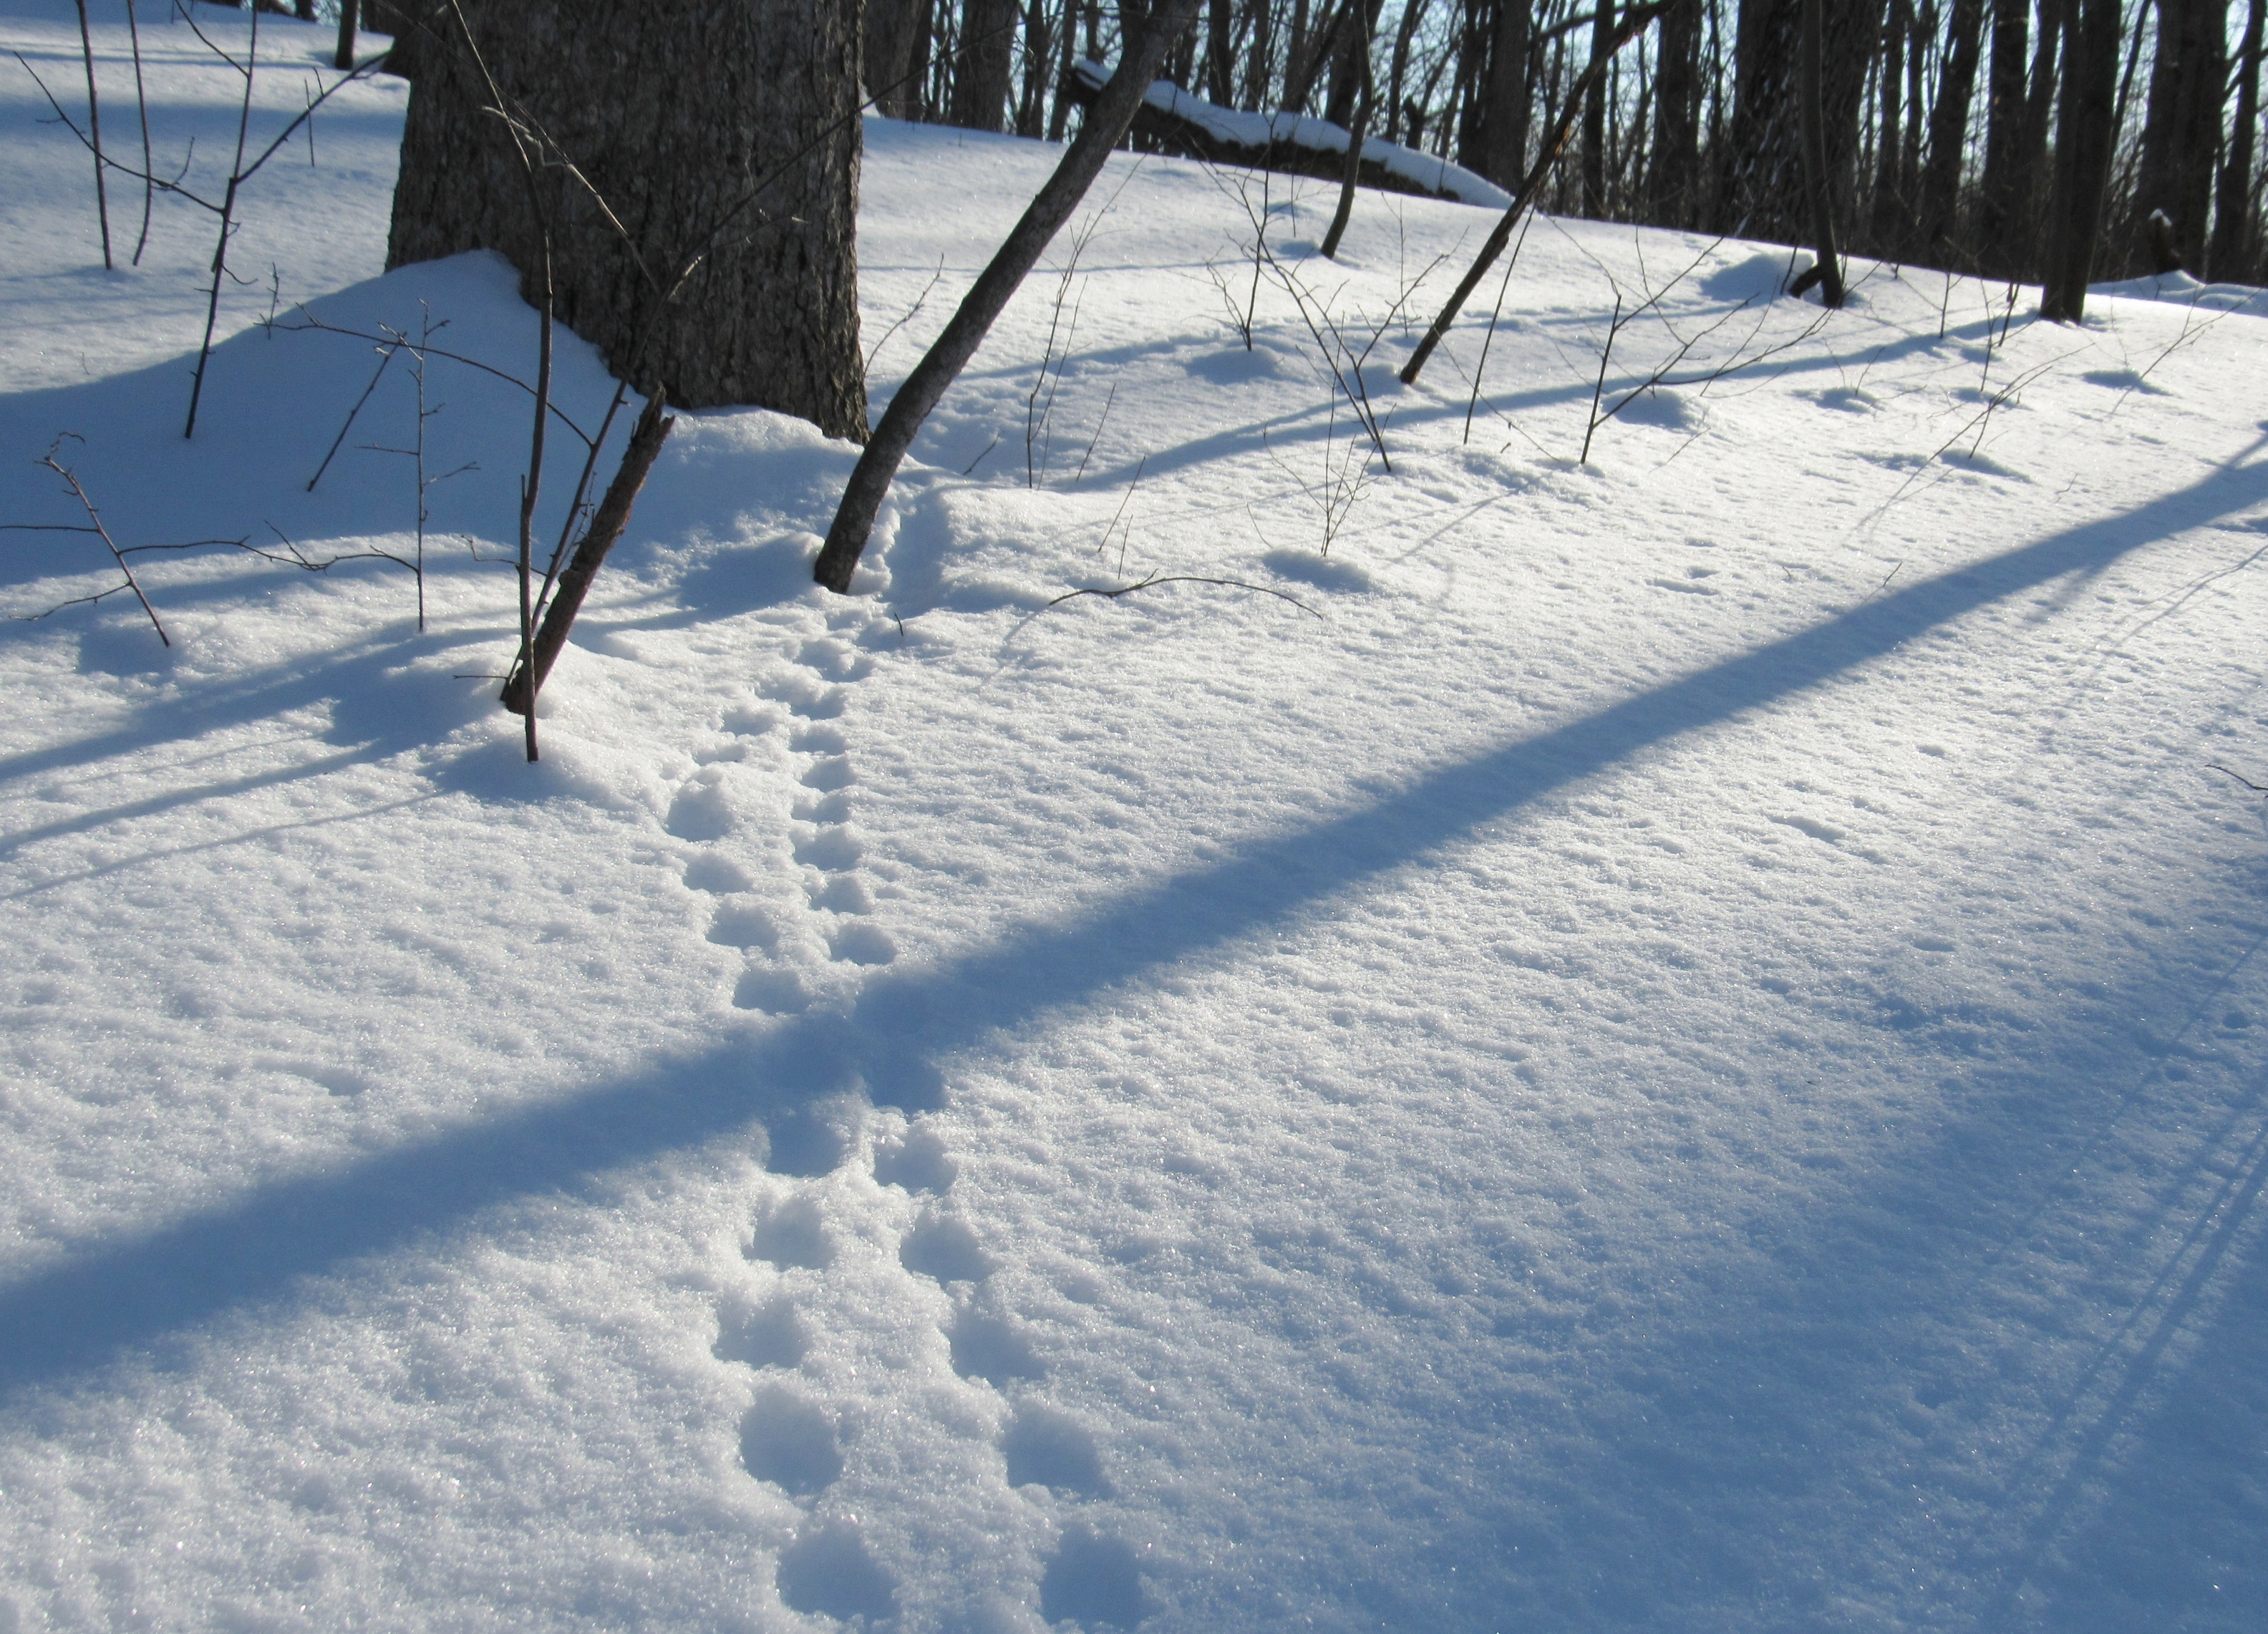 Red Squirrel: The evenly spaced and opposite placement of the paw prints indicate a squirrel bounding through the snow 